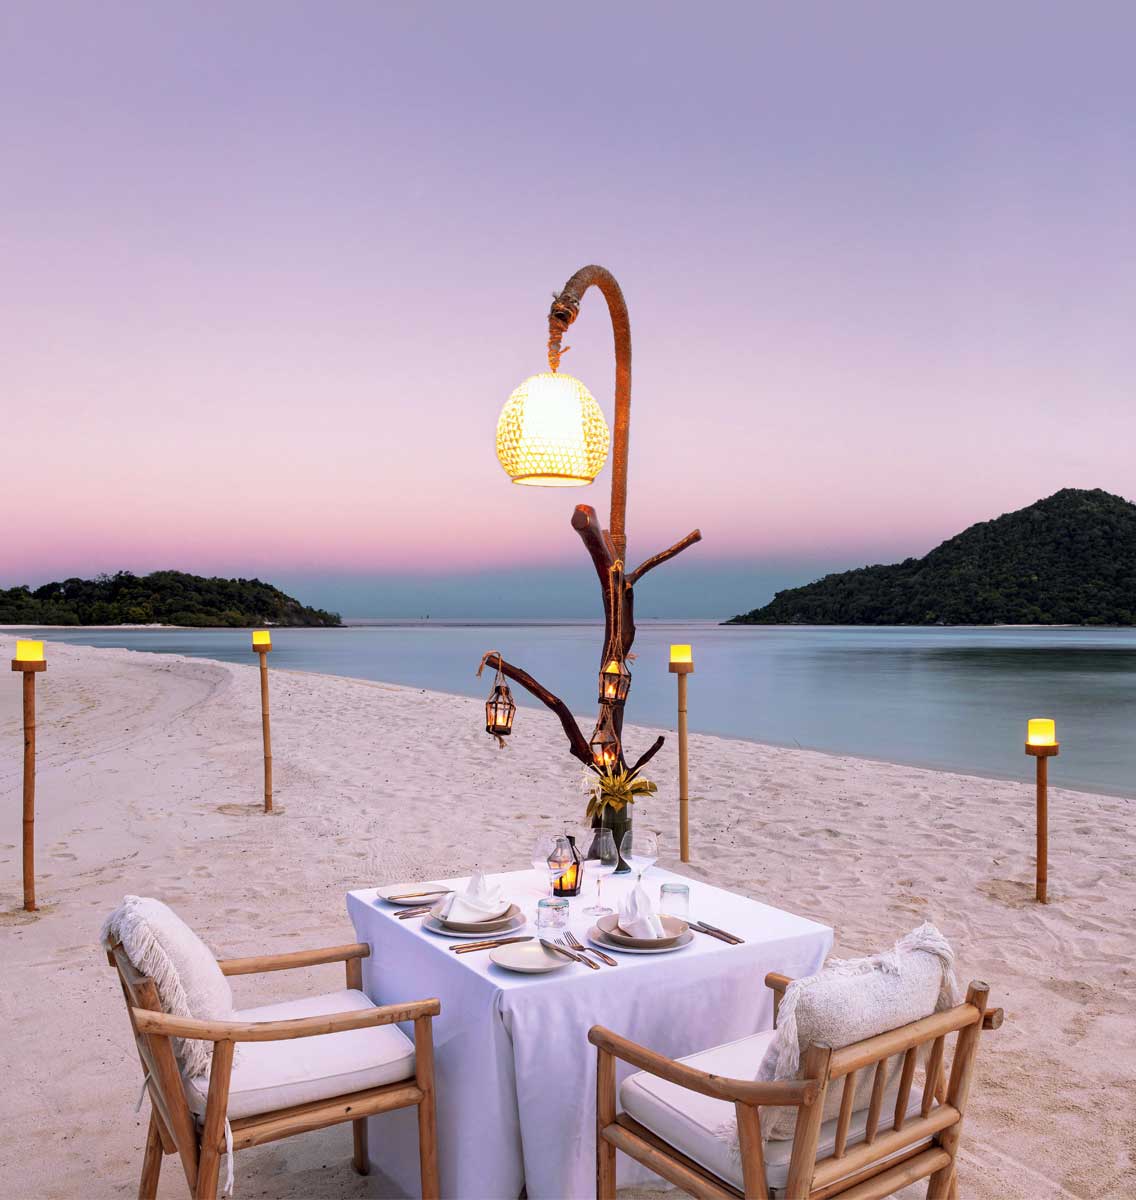 Romantic, private, candlelit dinner for two on the beach at Bawah Reserve island hotel and resort, Indonesia.